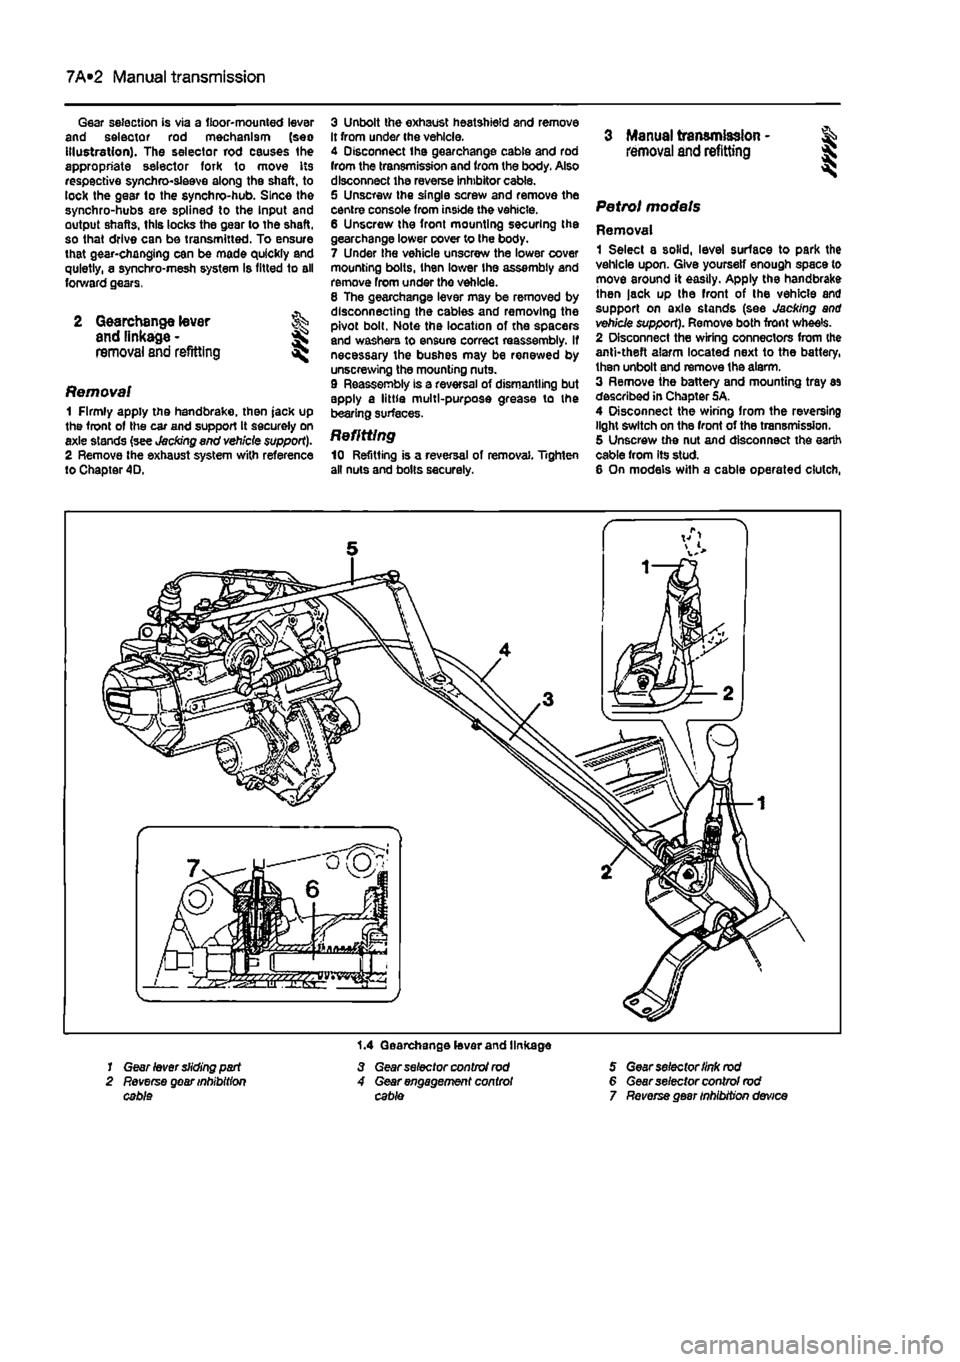 FIAT PUNTO 1997 176 / 1.G Workshop Manual 
7A*2 Manual transmission 
Gear selection is via a floor-mounted lever and selector rod mechanism (seo Illustration). The selector rod causes the appropriate selector fork to move its respective synch